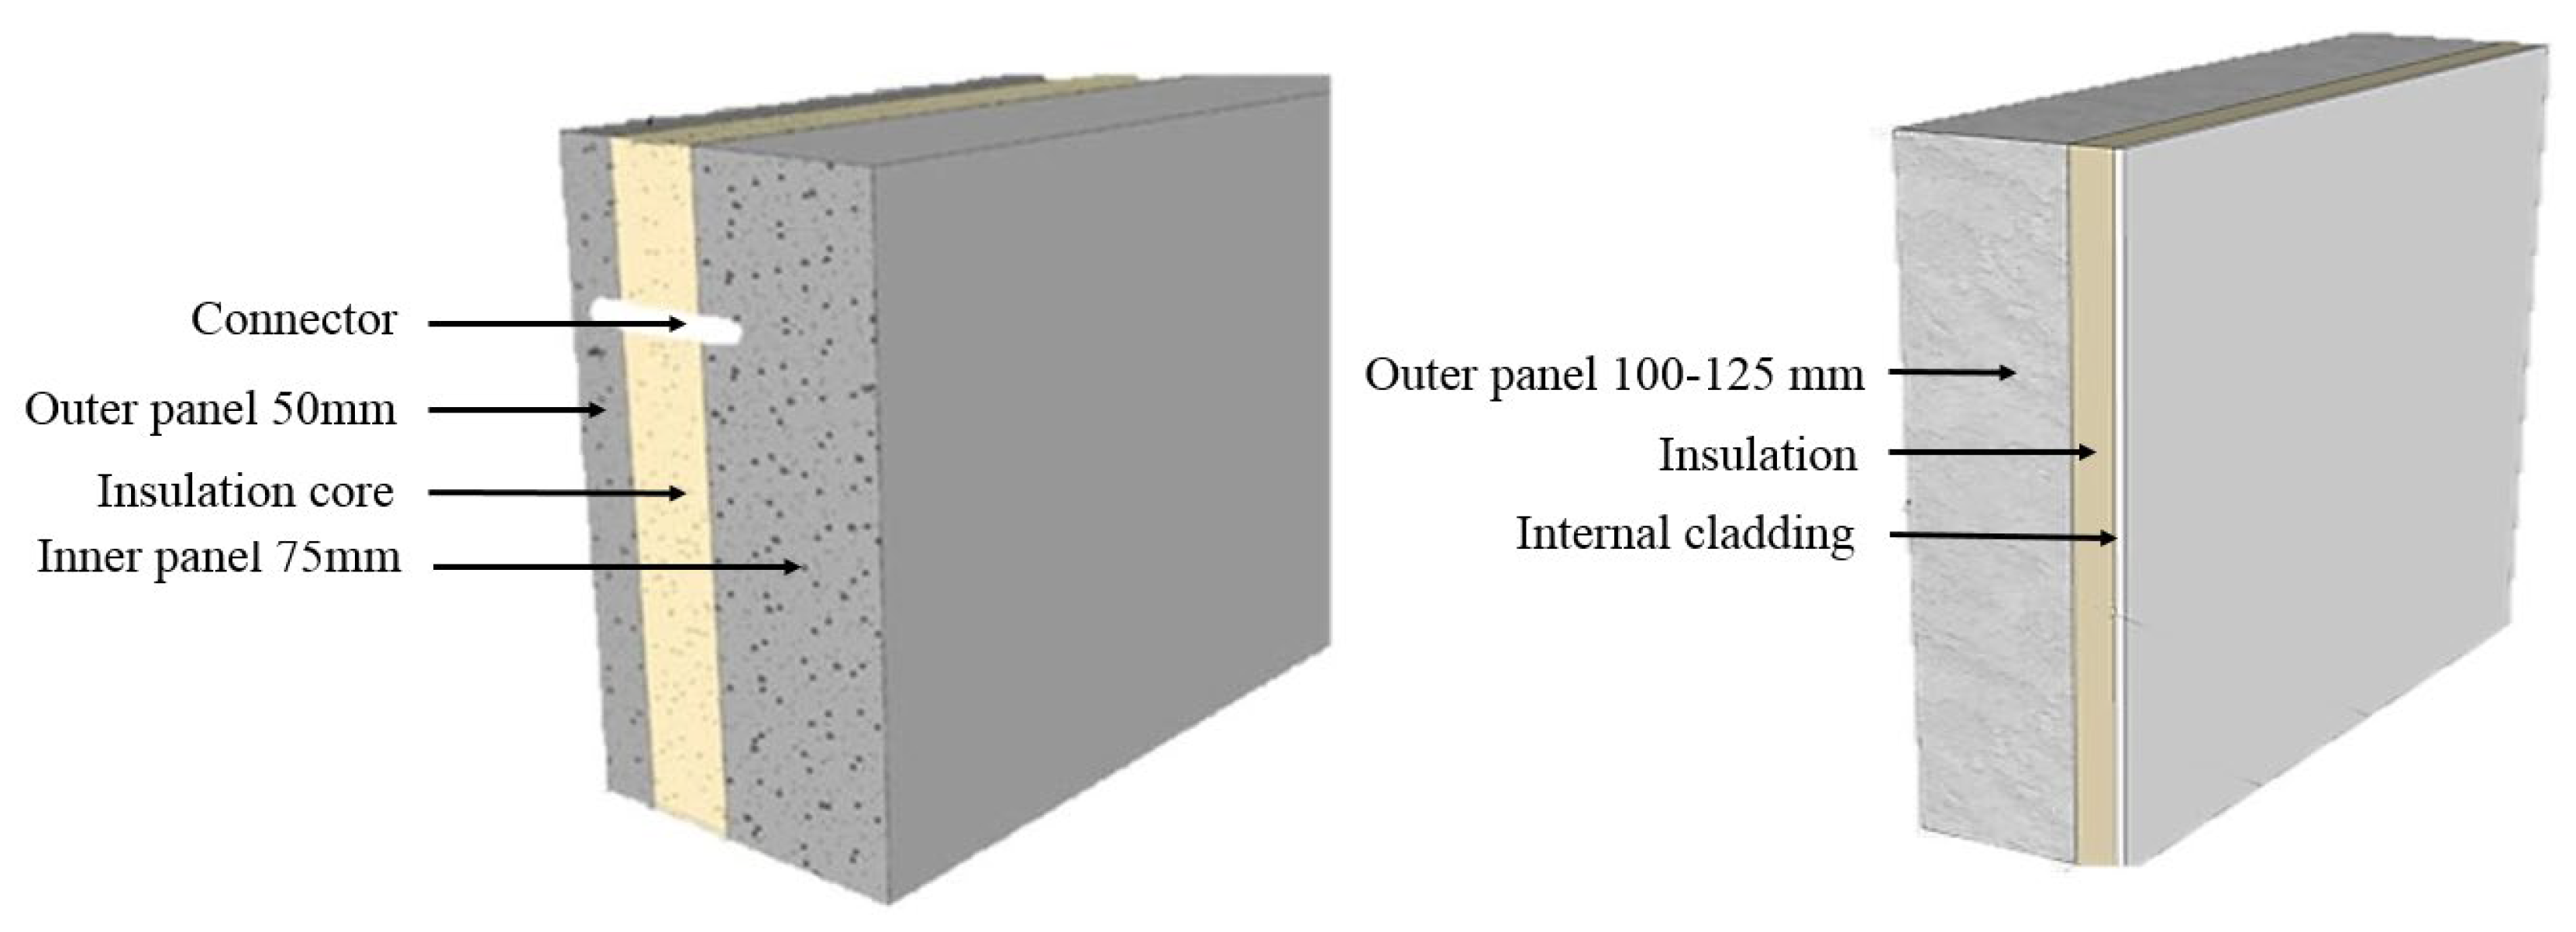 Buildings | Free Full-Text | Retrofit of Building Fa&ccedil;ade Using  Precast Sandwich Panel: An Integrated Thermal and Environmental Assessment  on BIM-Based LCA